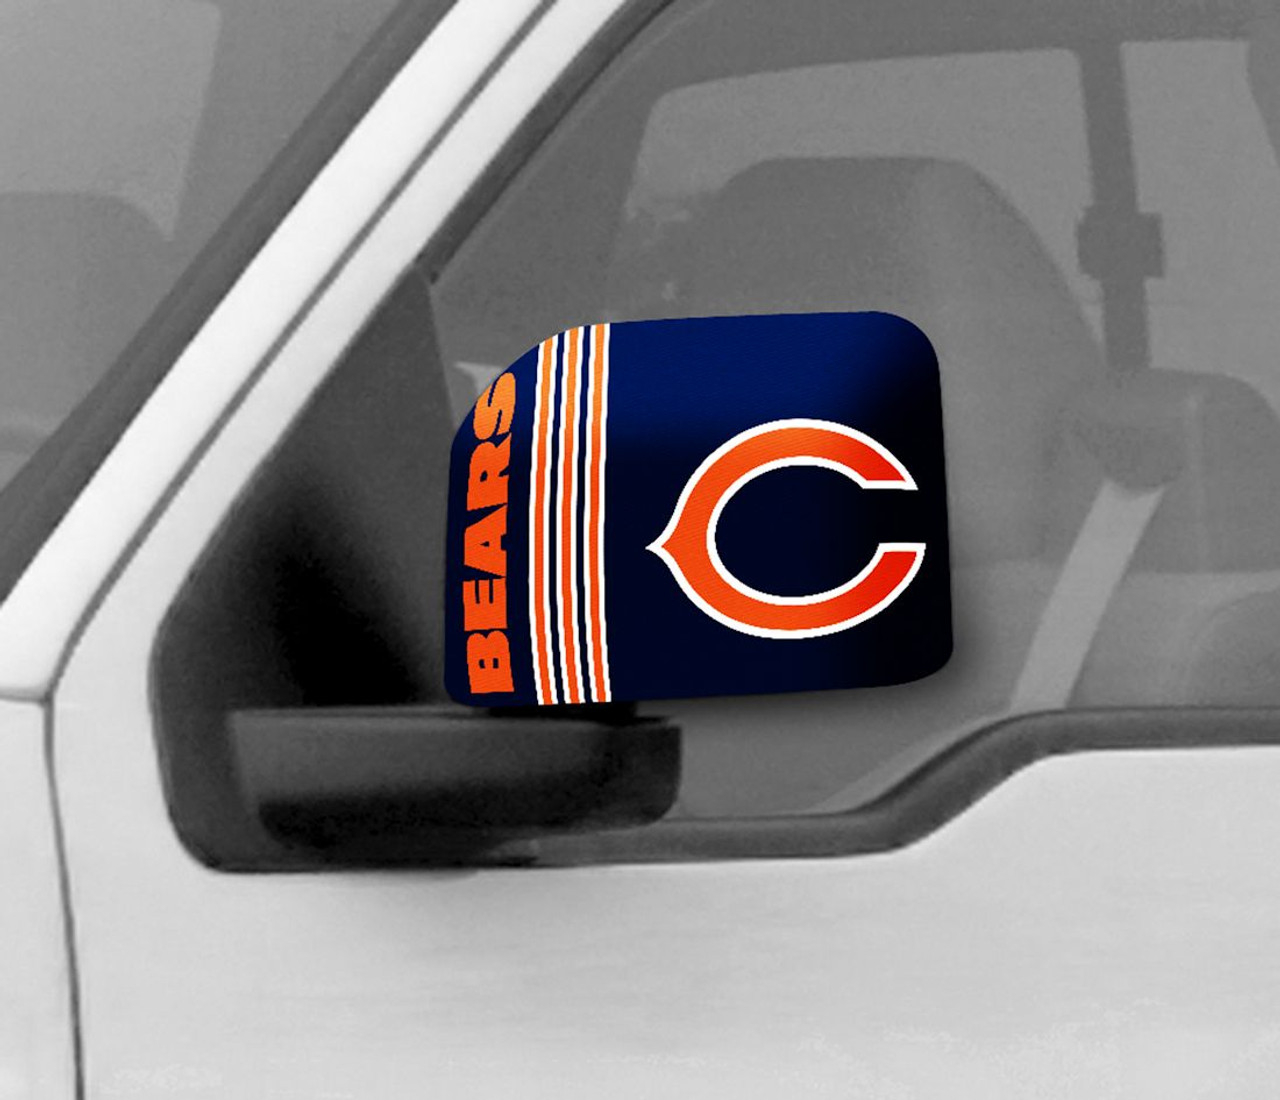 Fanmats Chicago Bears Mirror Cover - Large